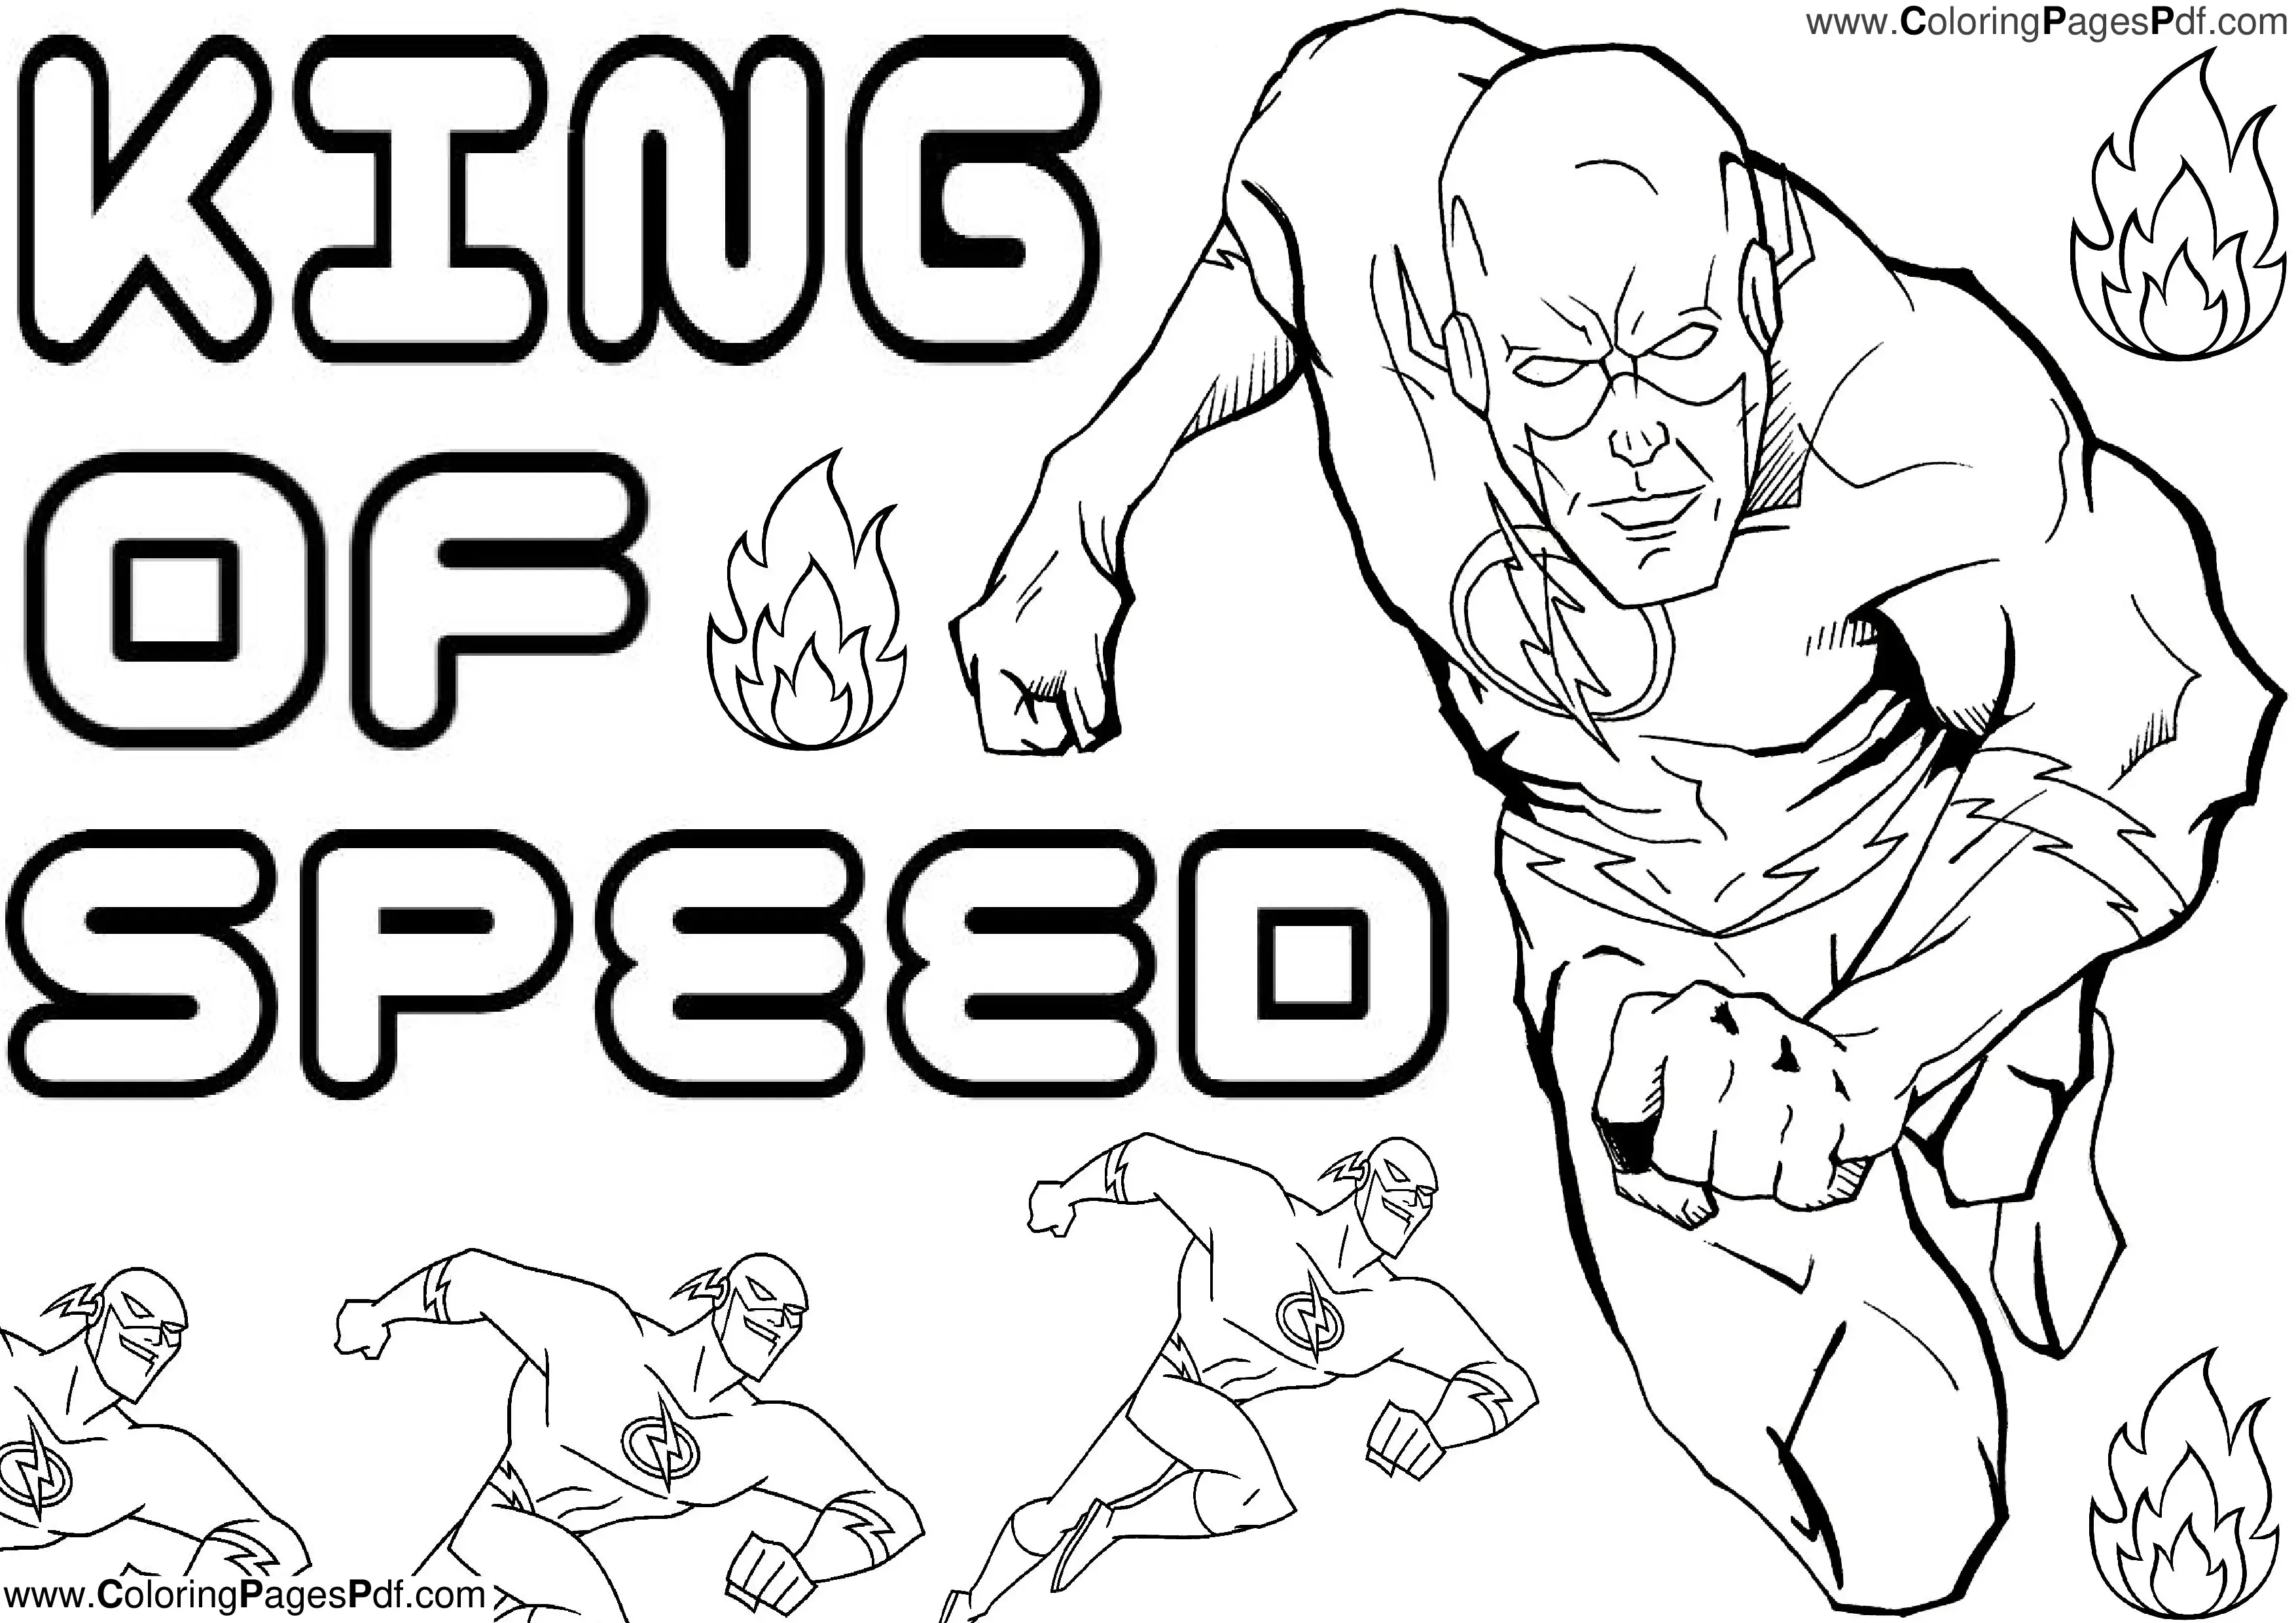 Flash coloring pages for adults